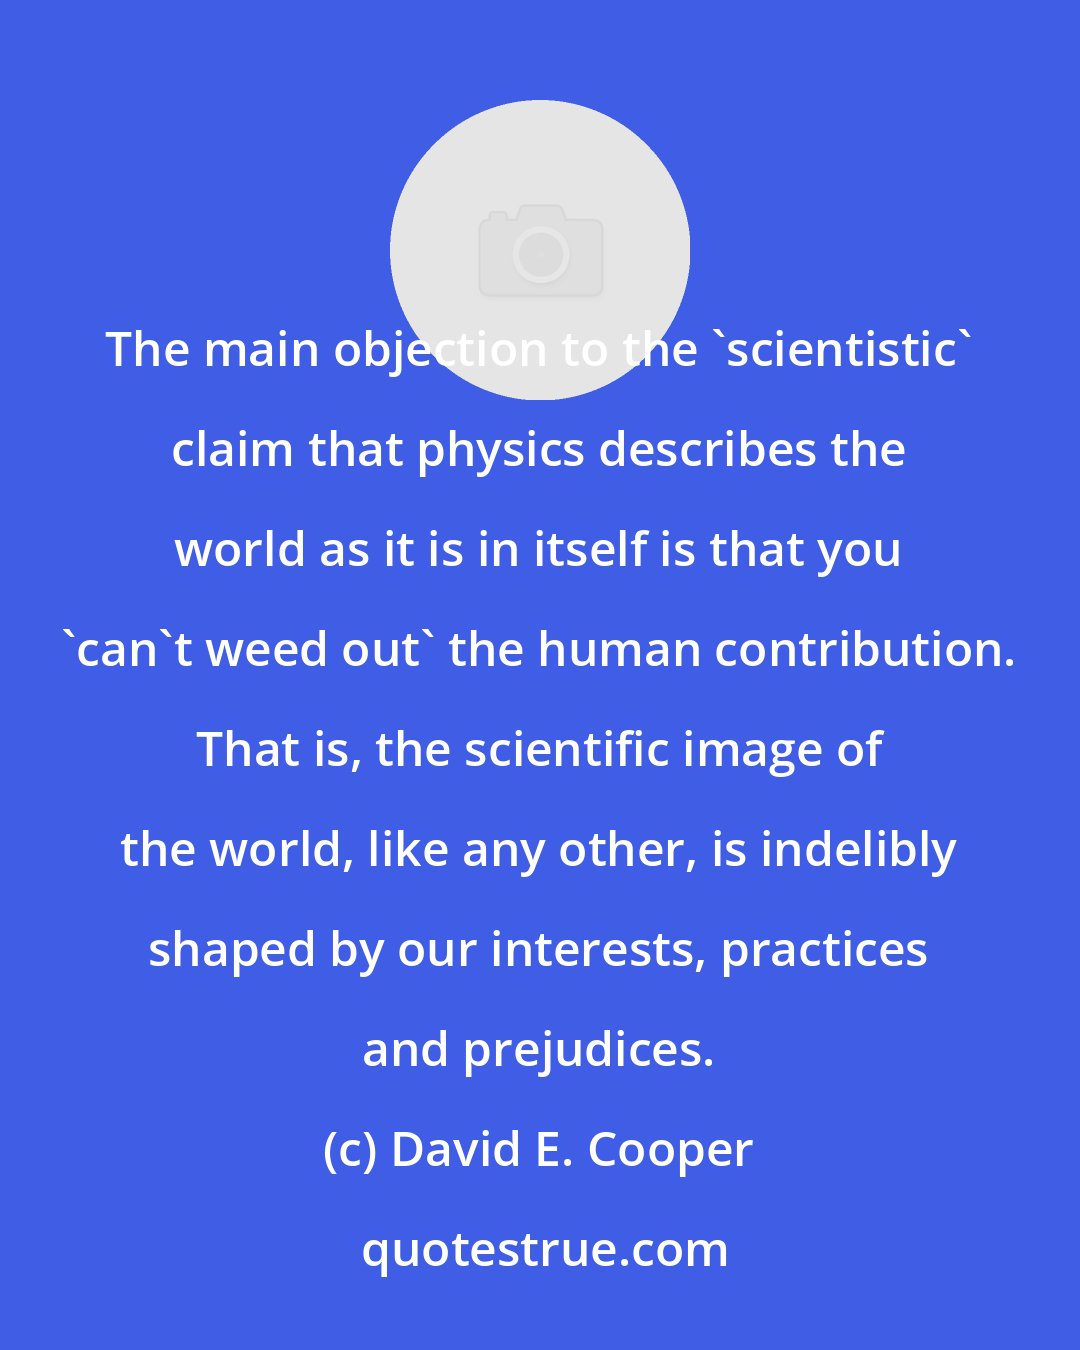 David E. Cooper: The main objection to the 'scientistic' claim that physics describes the world as it is in itself is that you 'can't weed out' the human contribution. That is, the scientific image of the world, like any other, is indelibly shaped by our interests, practices and prejudices.